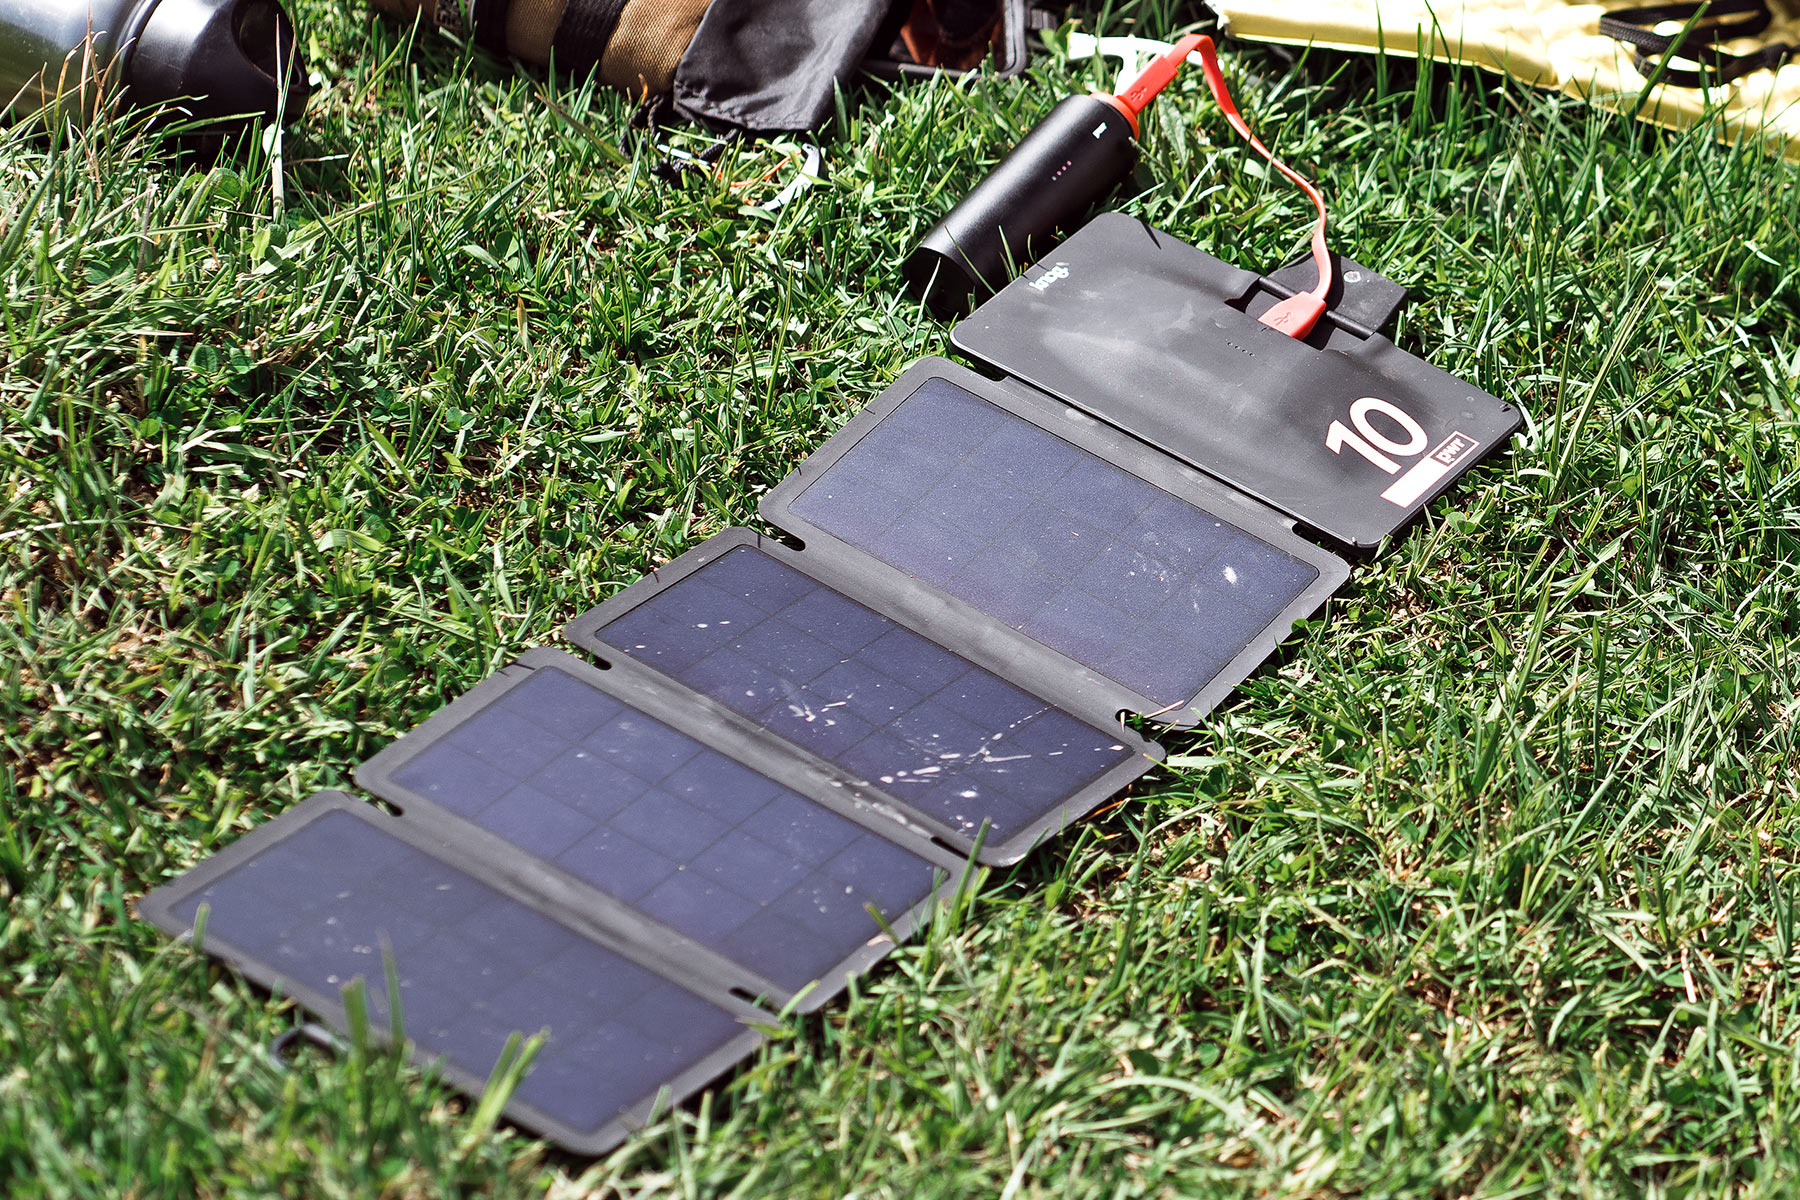 Knog PWR Solar 10W, folding compact photovoltaic panel bikepacking solar charger